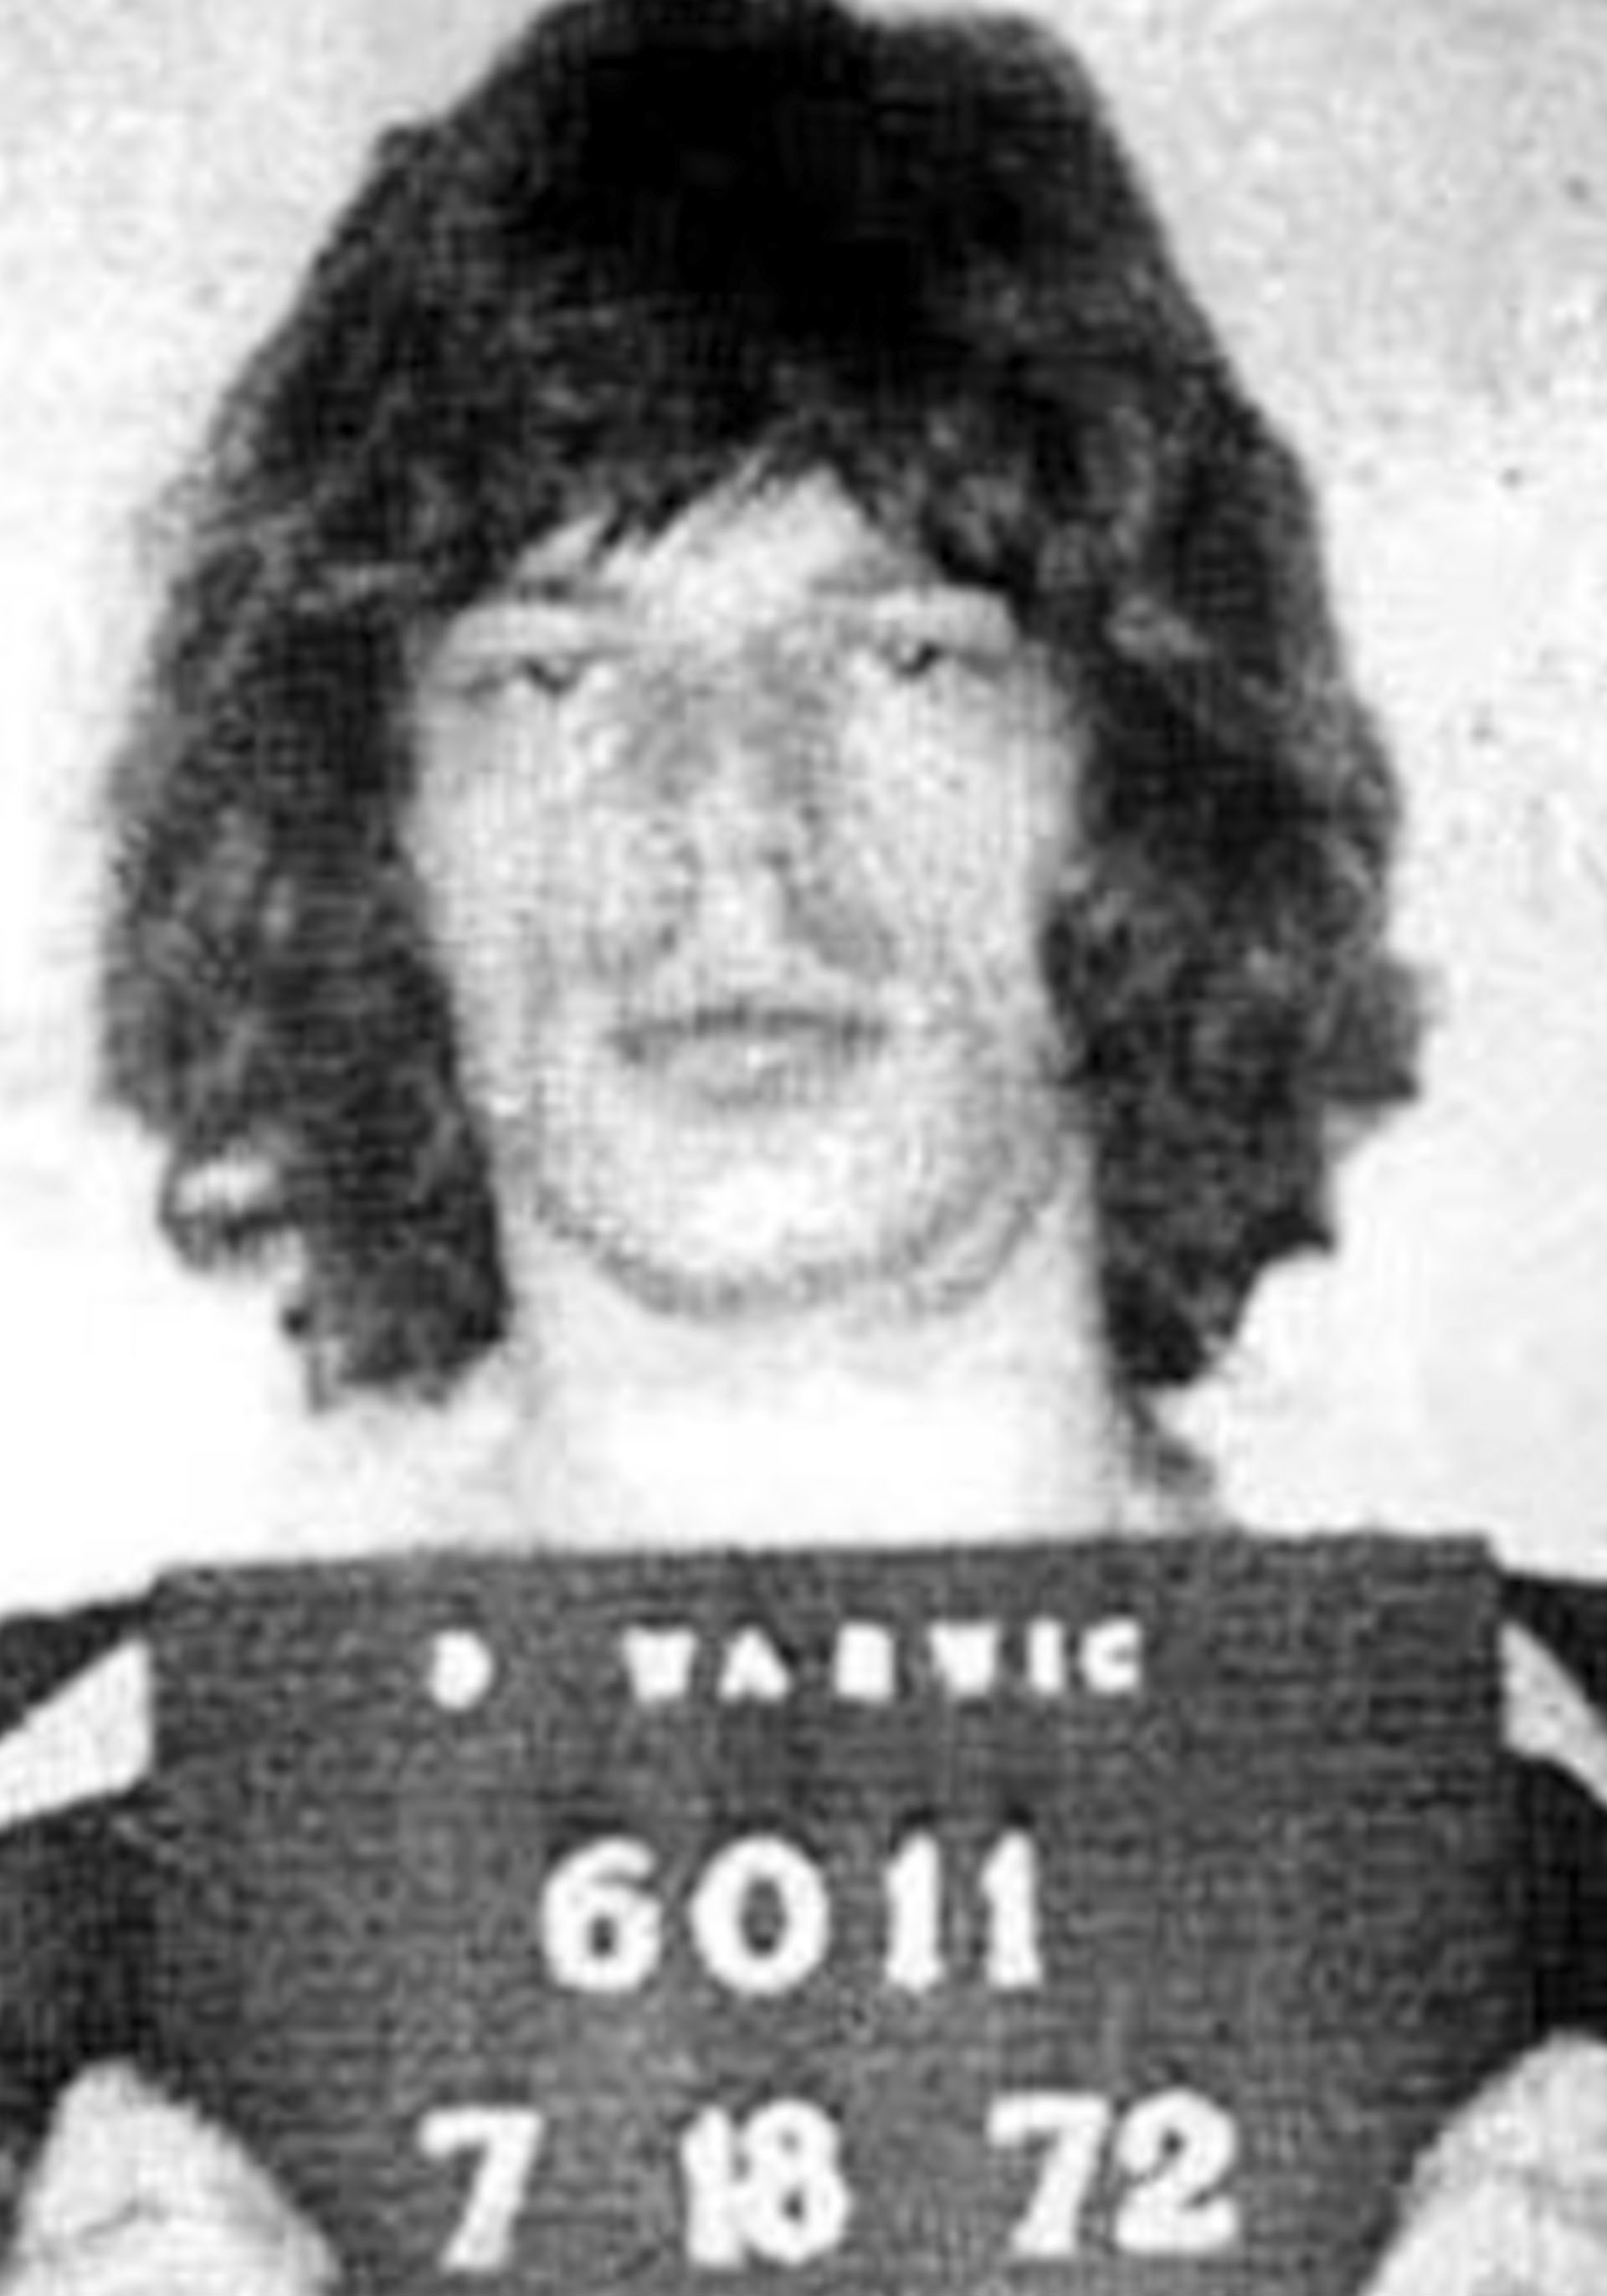 Mug shot of Mick Jagger on July 18, 1972. That day he was released from prison with Richards and that night they performed a concert.  They had been arrested for assaulting a photographer (Photo by Kypros/Getty Images)